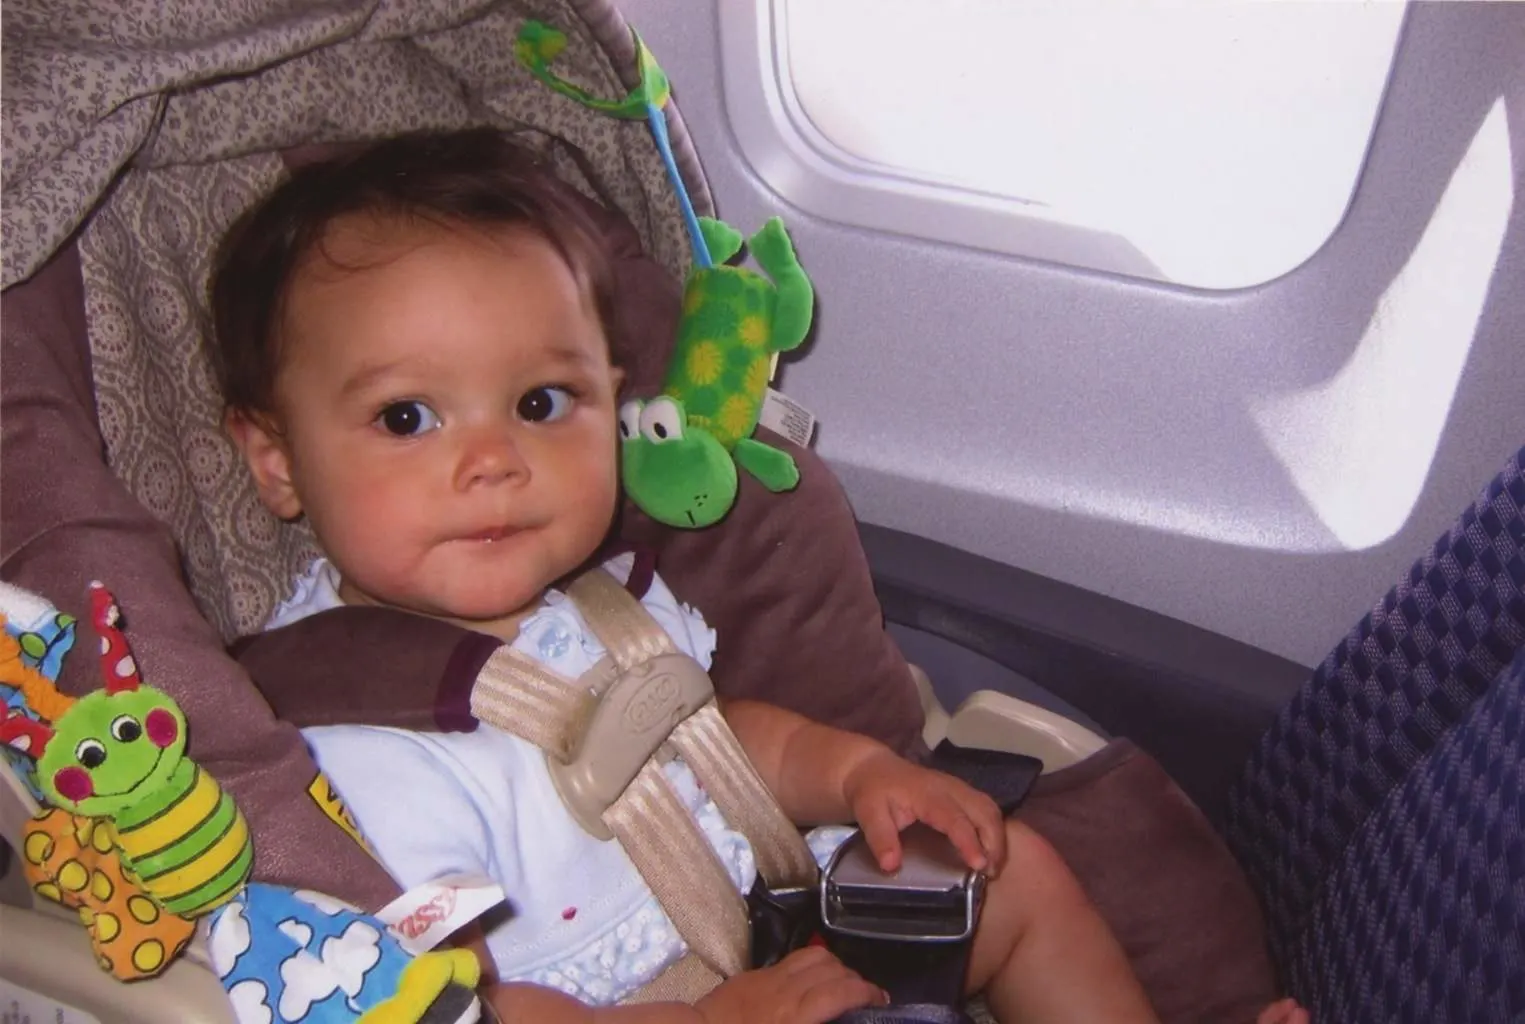 Travel expert Debra Schroeder shares tips on flying with a baby or toddler to keep your sanity and avoid irritating other passengers. https://www.travelingwellforless.com